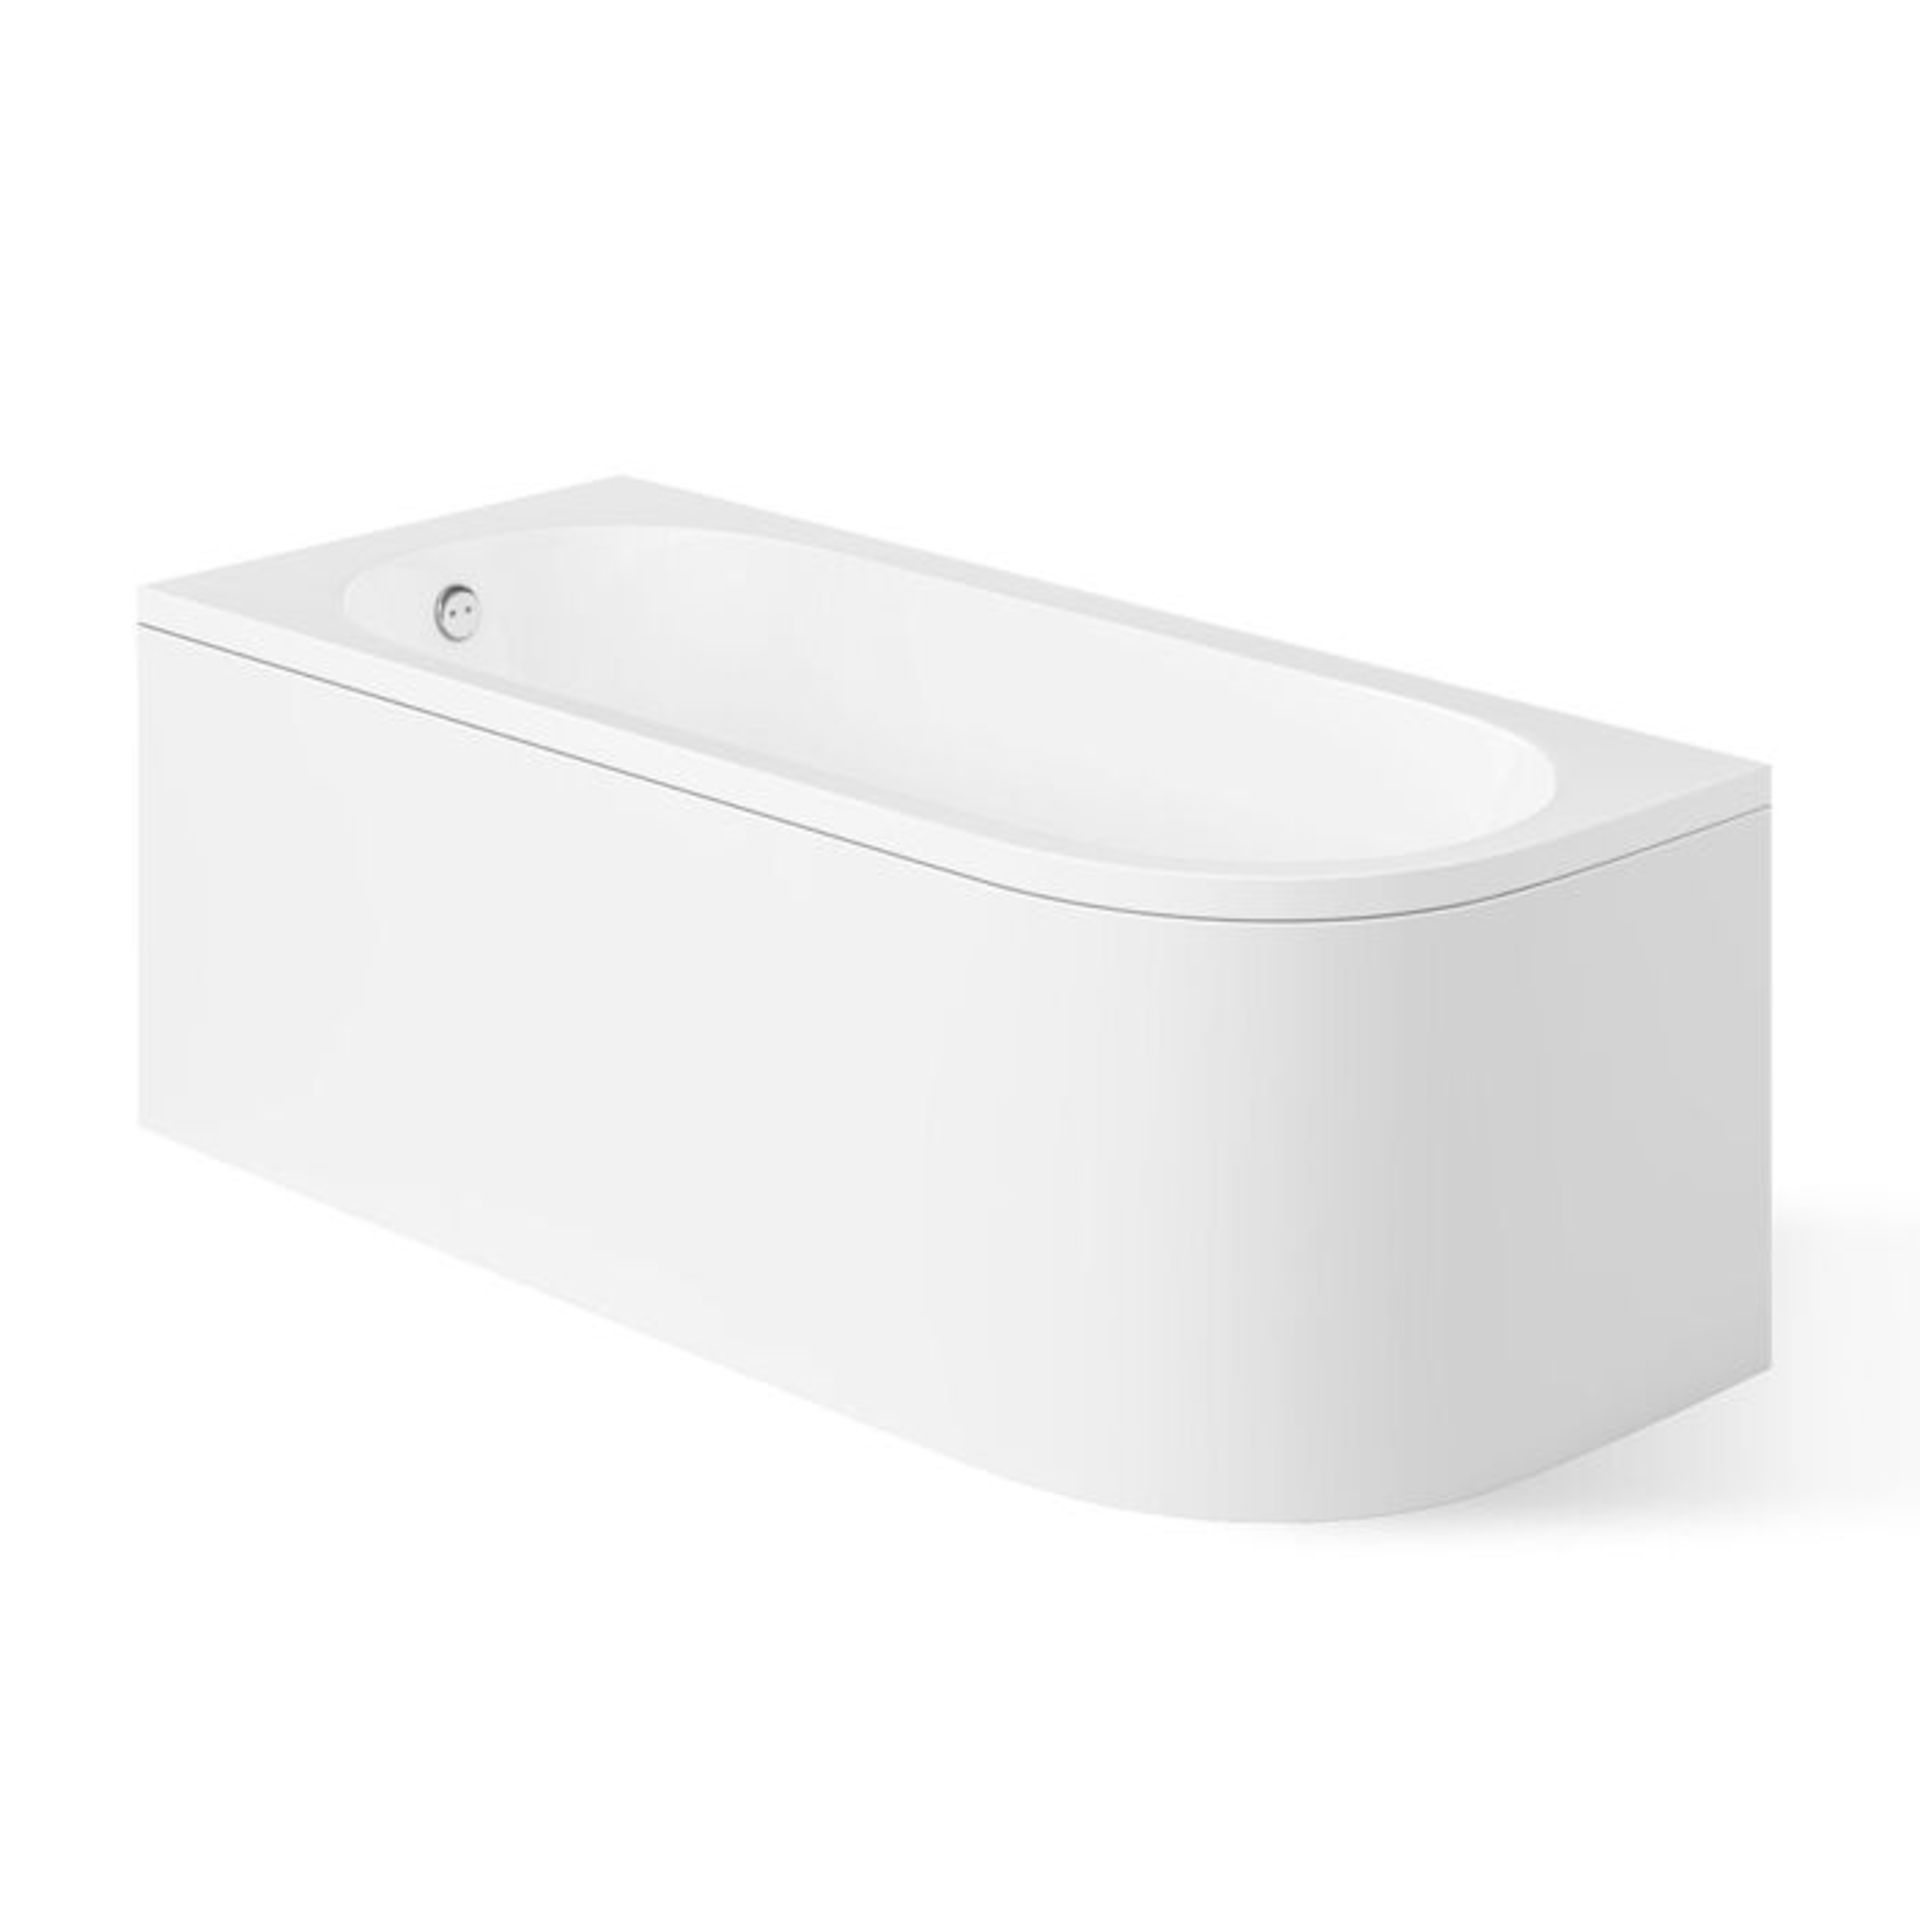 (AA35) 1700mm Denver Corner Back to Wall Bath- Left Hand. RRP £499.99. Double ended feature ... - Image 2 of 6